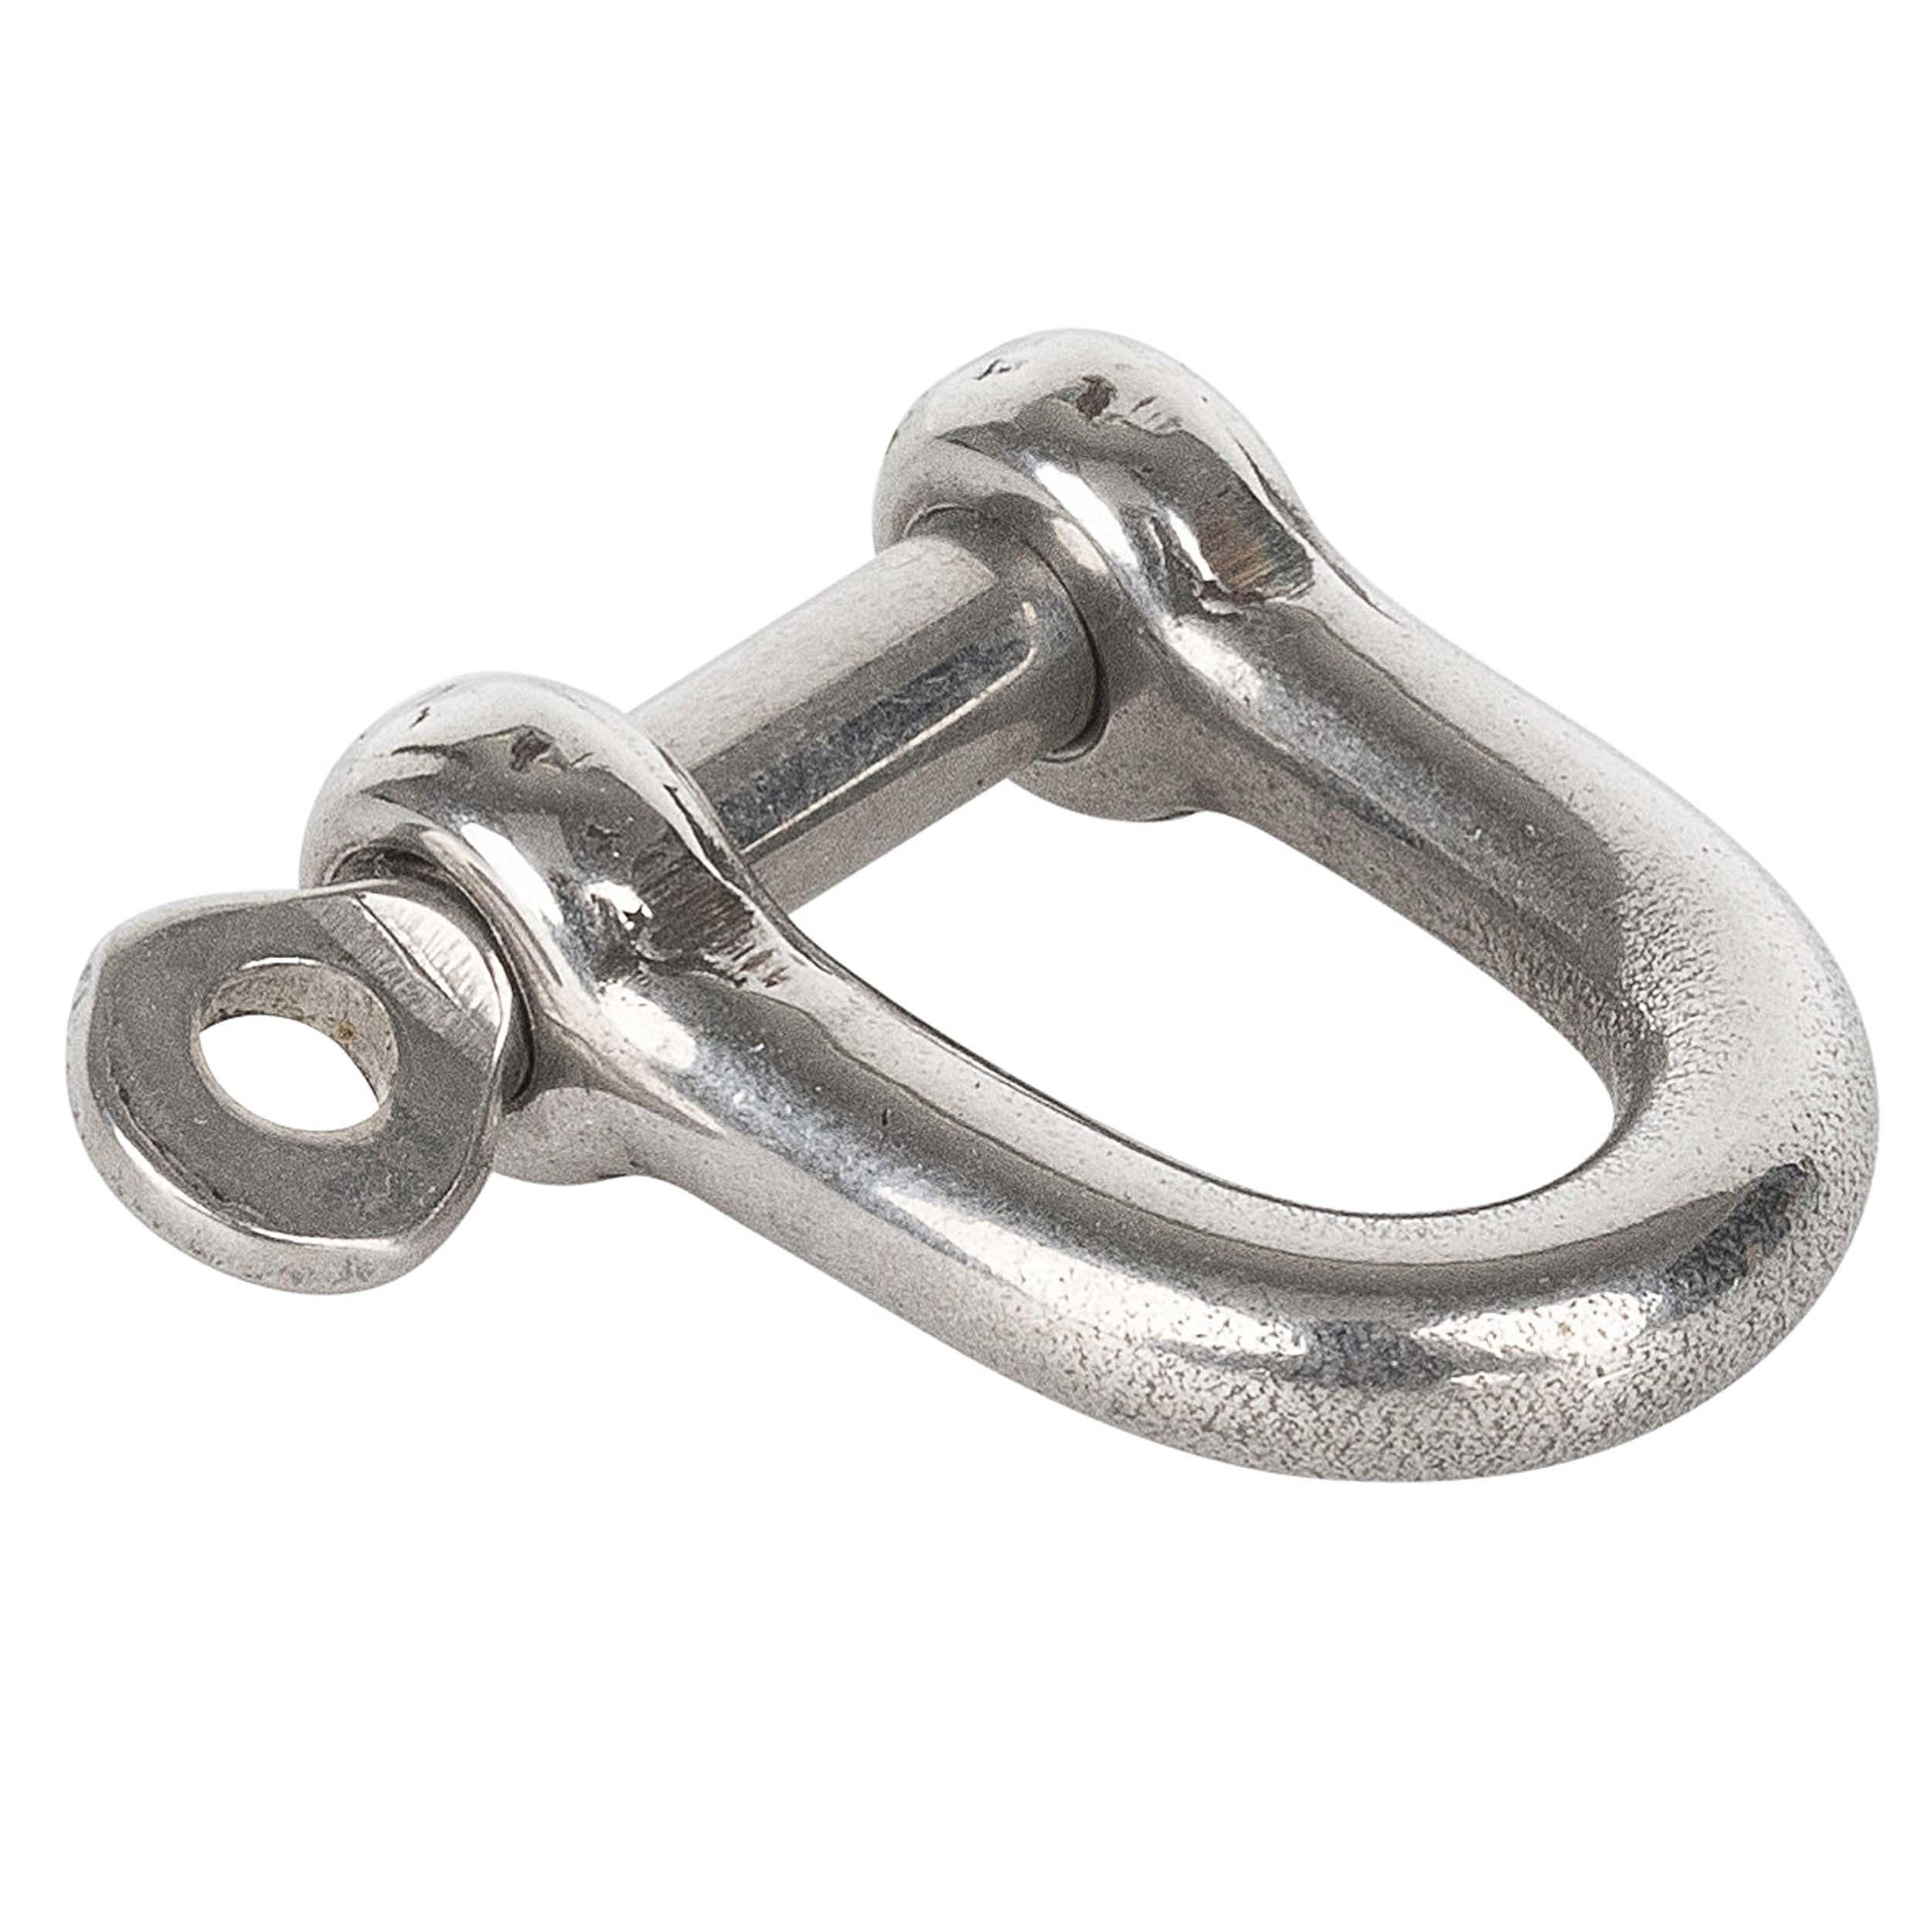 6 mm stainless steel straight captive pin sailing shackle 1/4